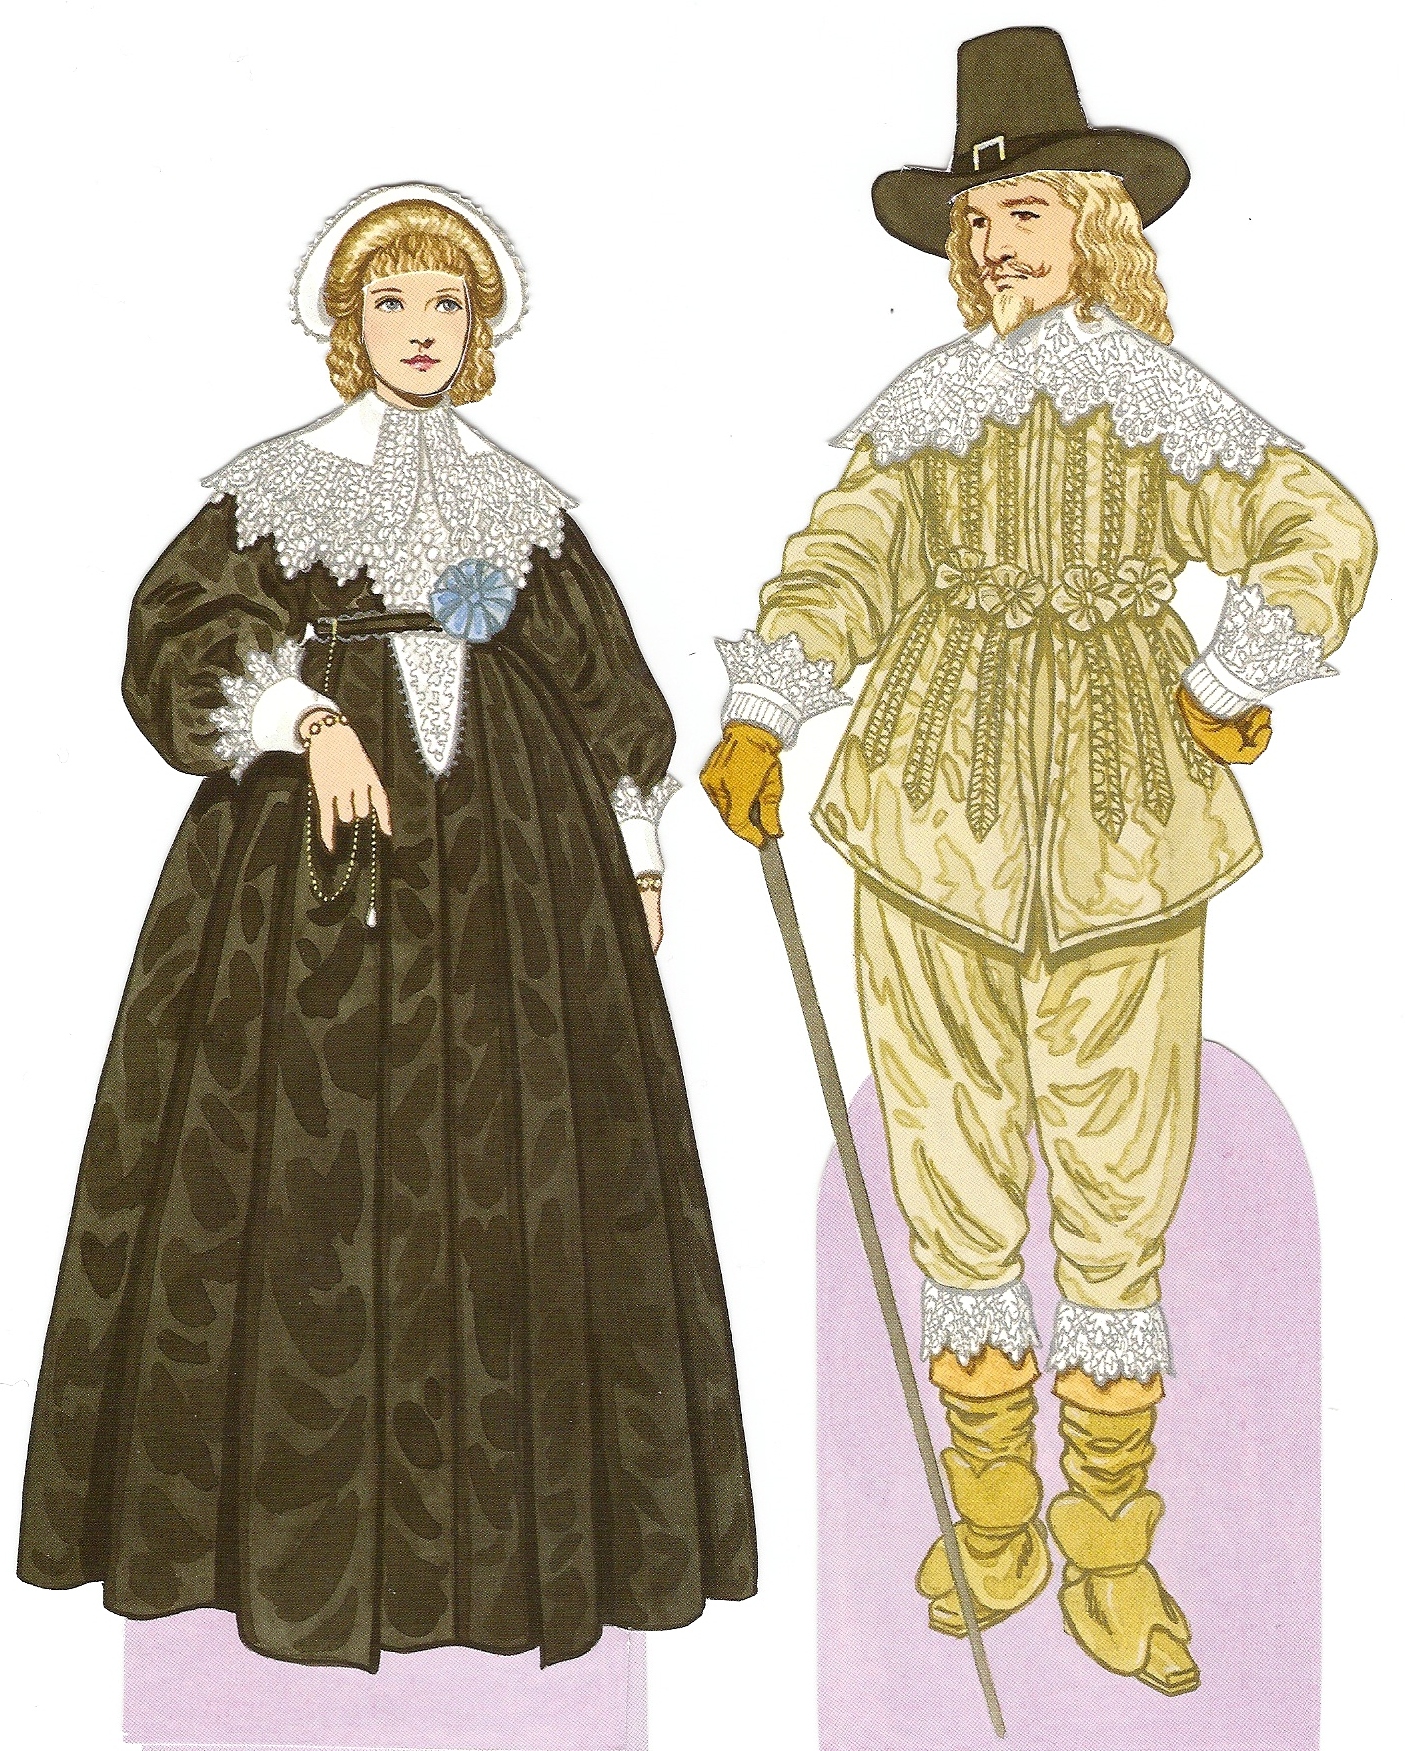 Fashions of the Middle Classes, as Portrayed by Paper Dolls